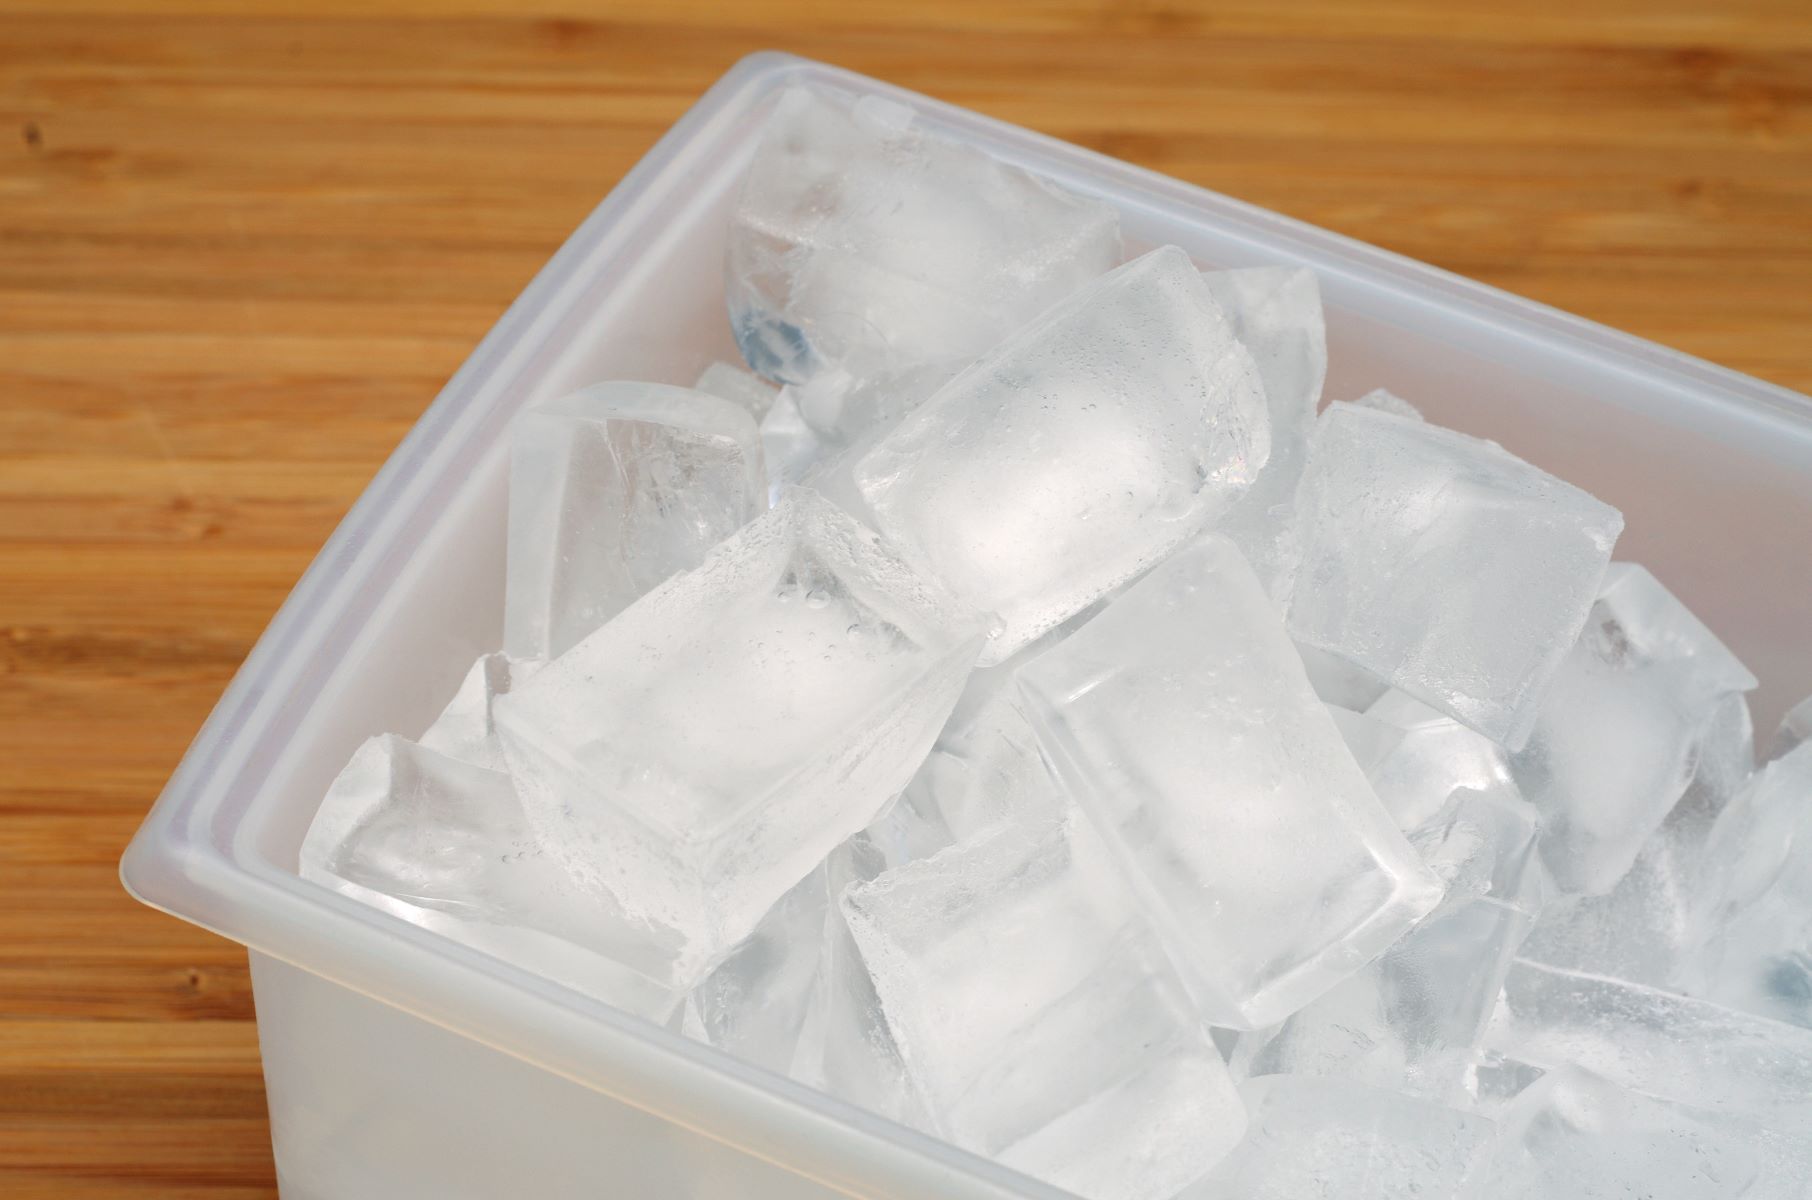 The Surprising Lifespan Of An Ice Cube In The Freezer!